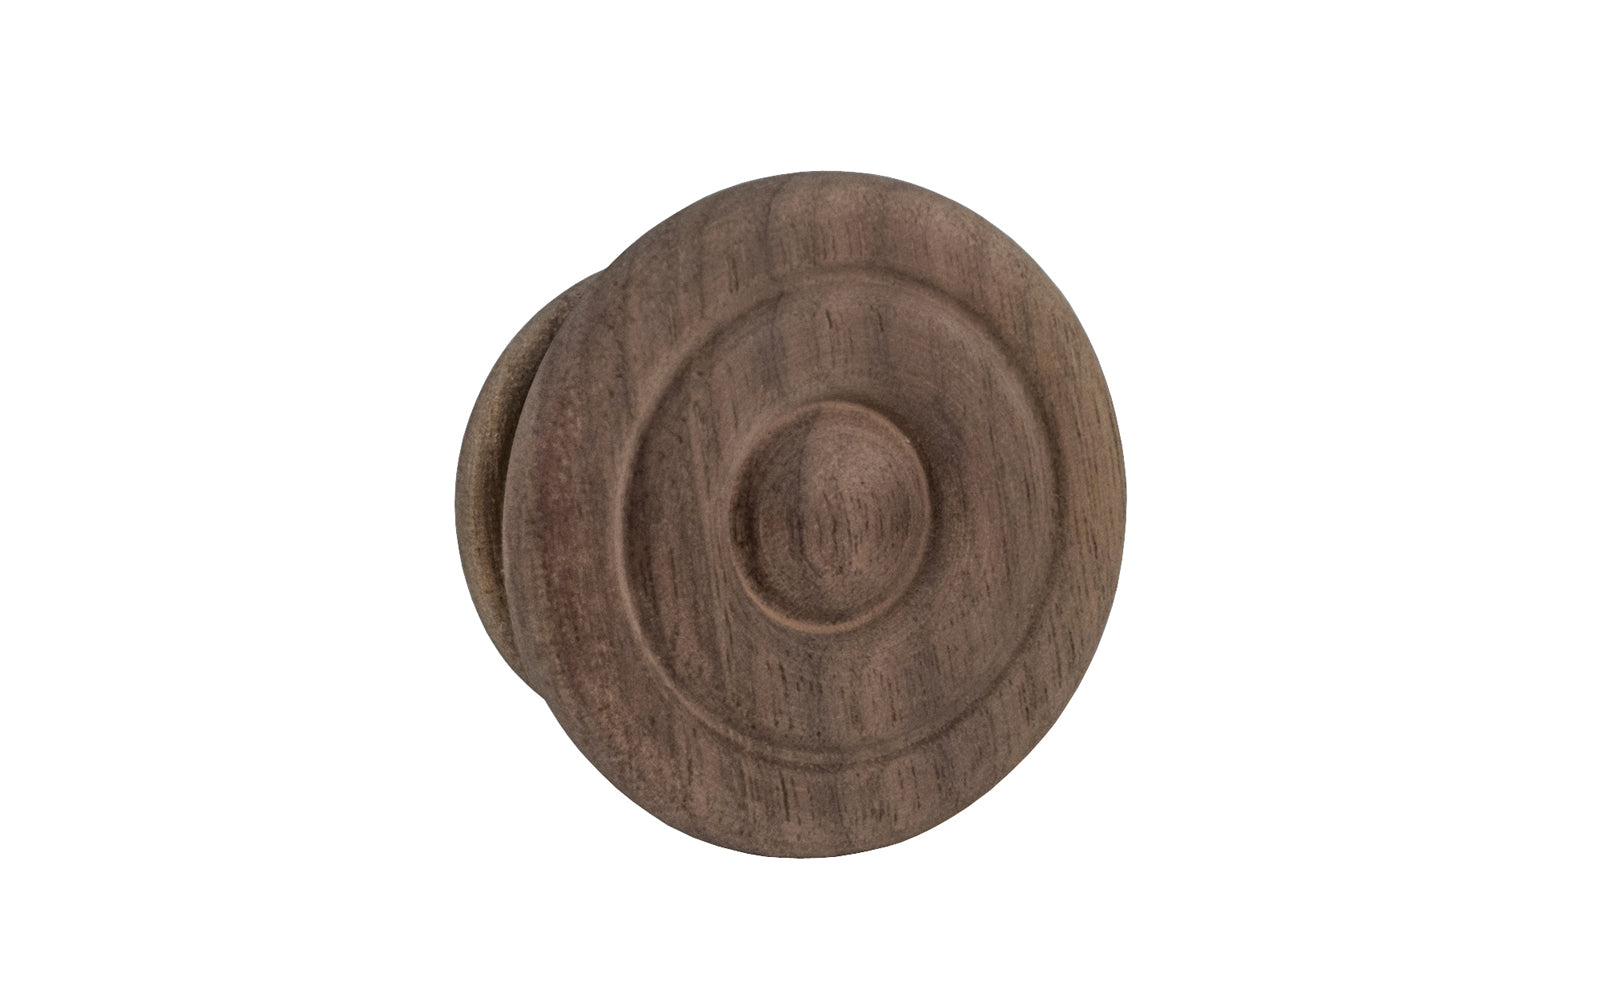 A classic walnut wood round cabinet knob with a smooth ring circle design. They may be stained, painted, or varnished if desired. Late 19th Century style of hardware. Great for a wide variety of uses including drawers, kitchen cabinets, smaller doors, furniture, cabinet doors. 1-1/2" Diameter Knob.